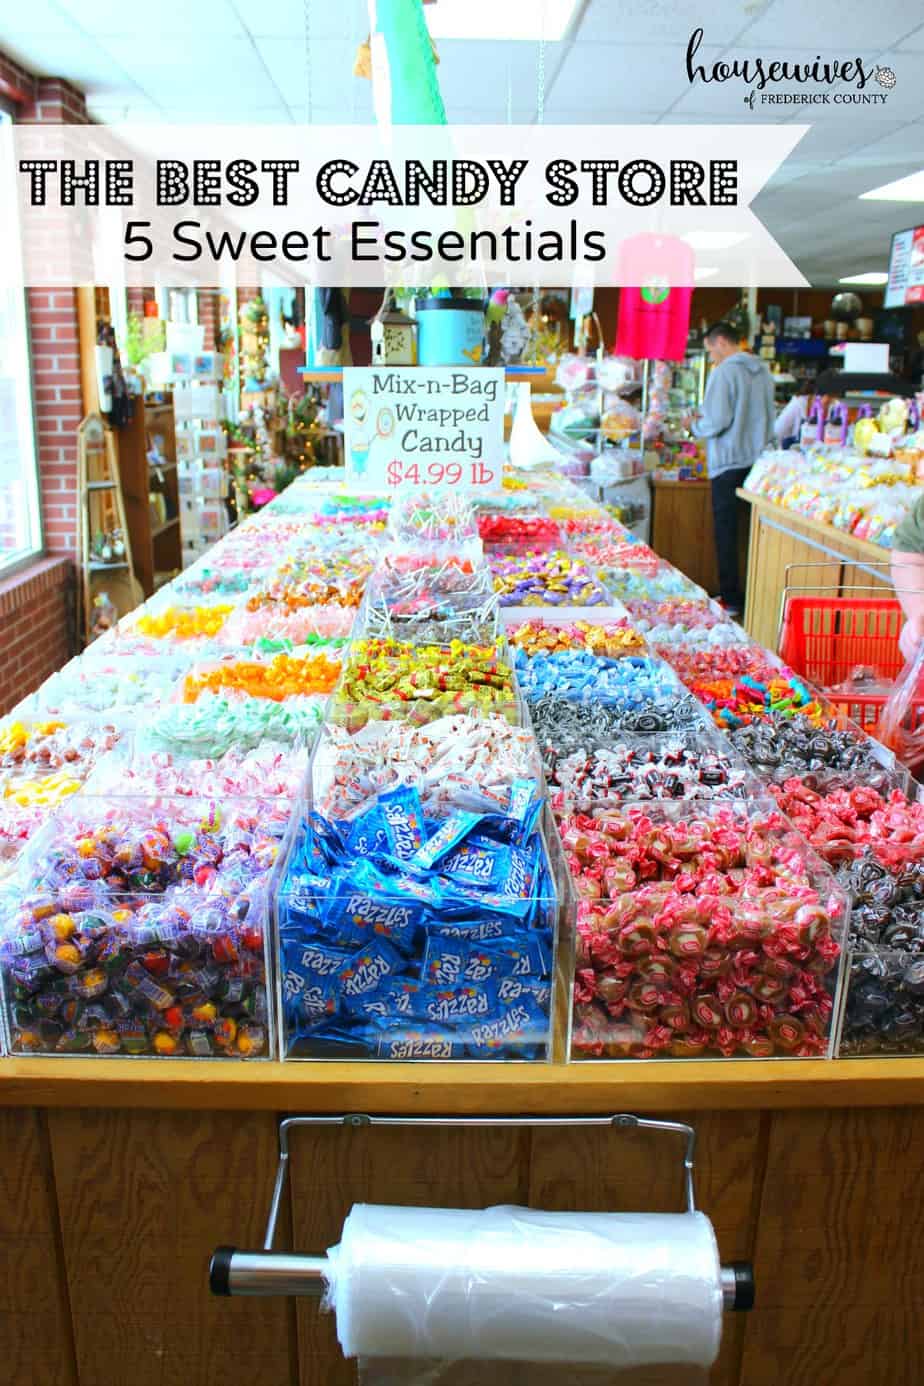 The Best Candy Store in Frederick Md: 5 Sweet Essentials